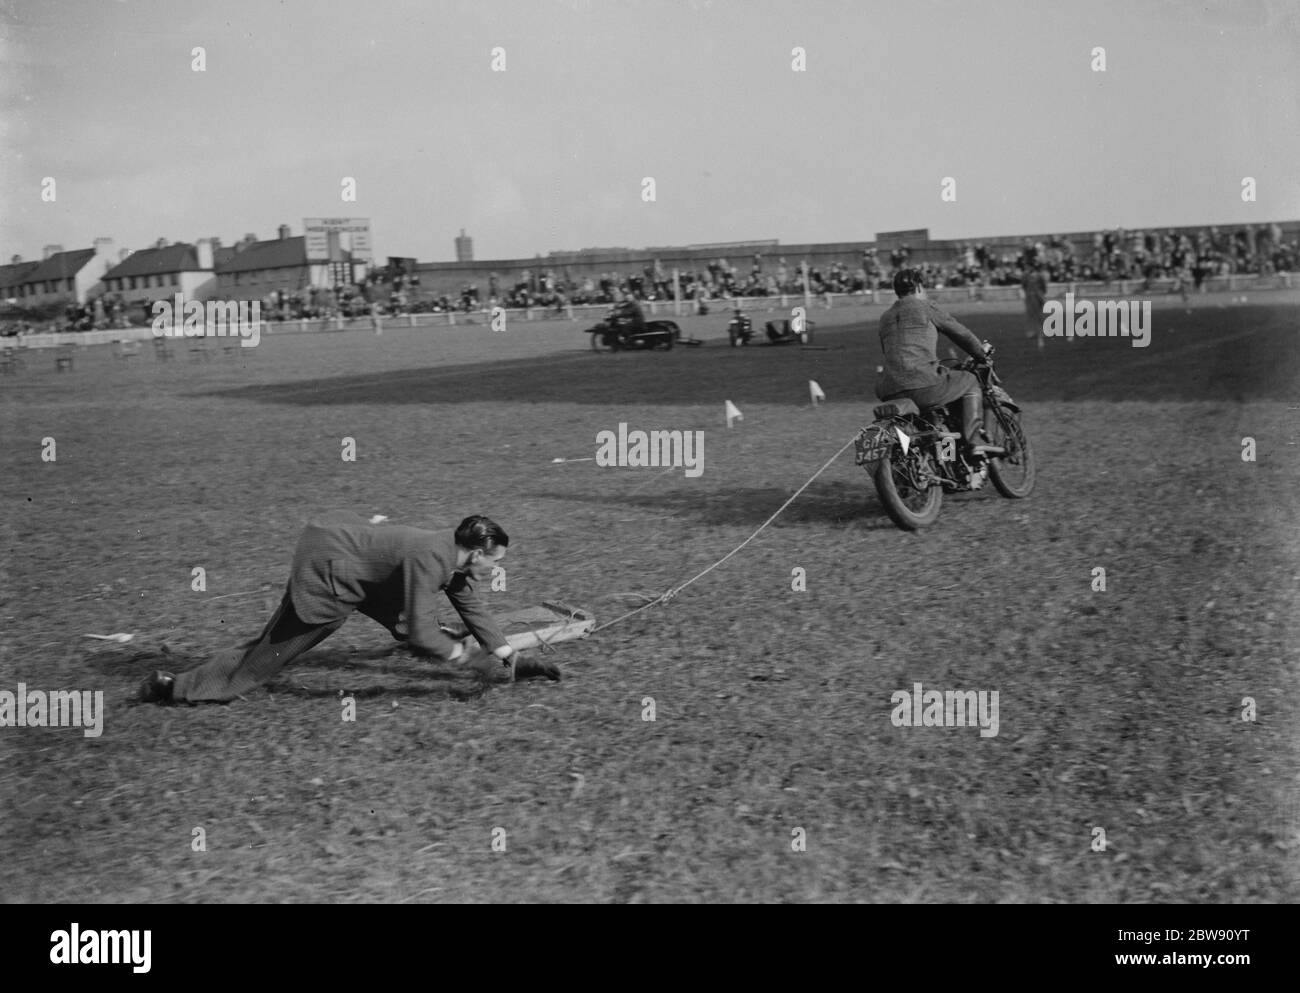 The Gravesend and District Motor Cycle Gymkhana in Kent . This race involves the motorbikes towing someone on a wooden plank around the track . 19 June 1939 Stock Photo